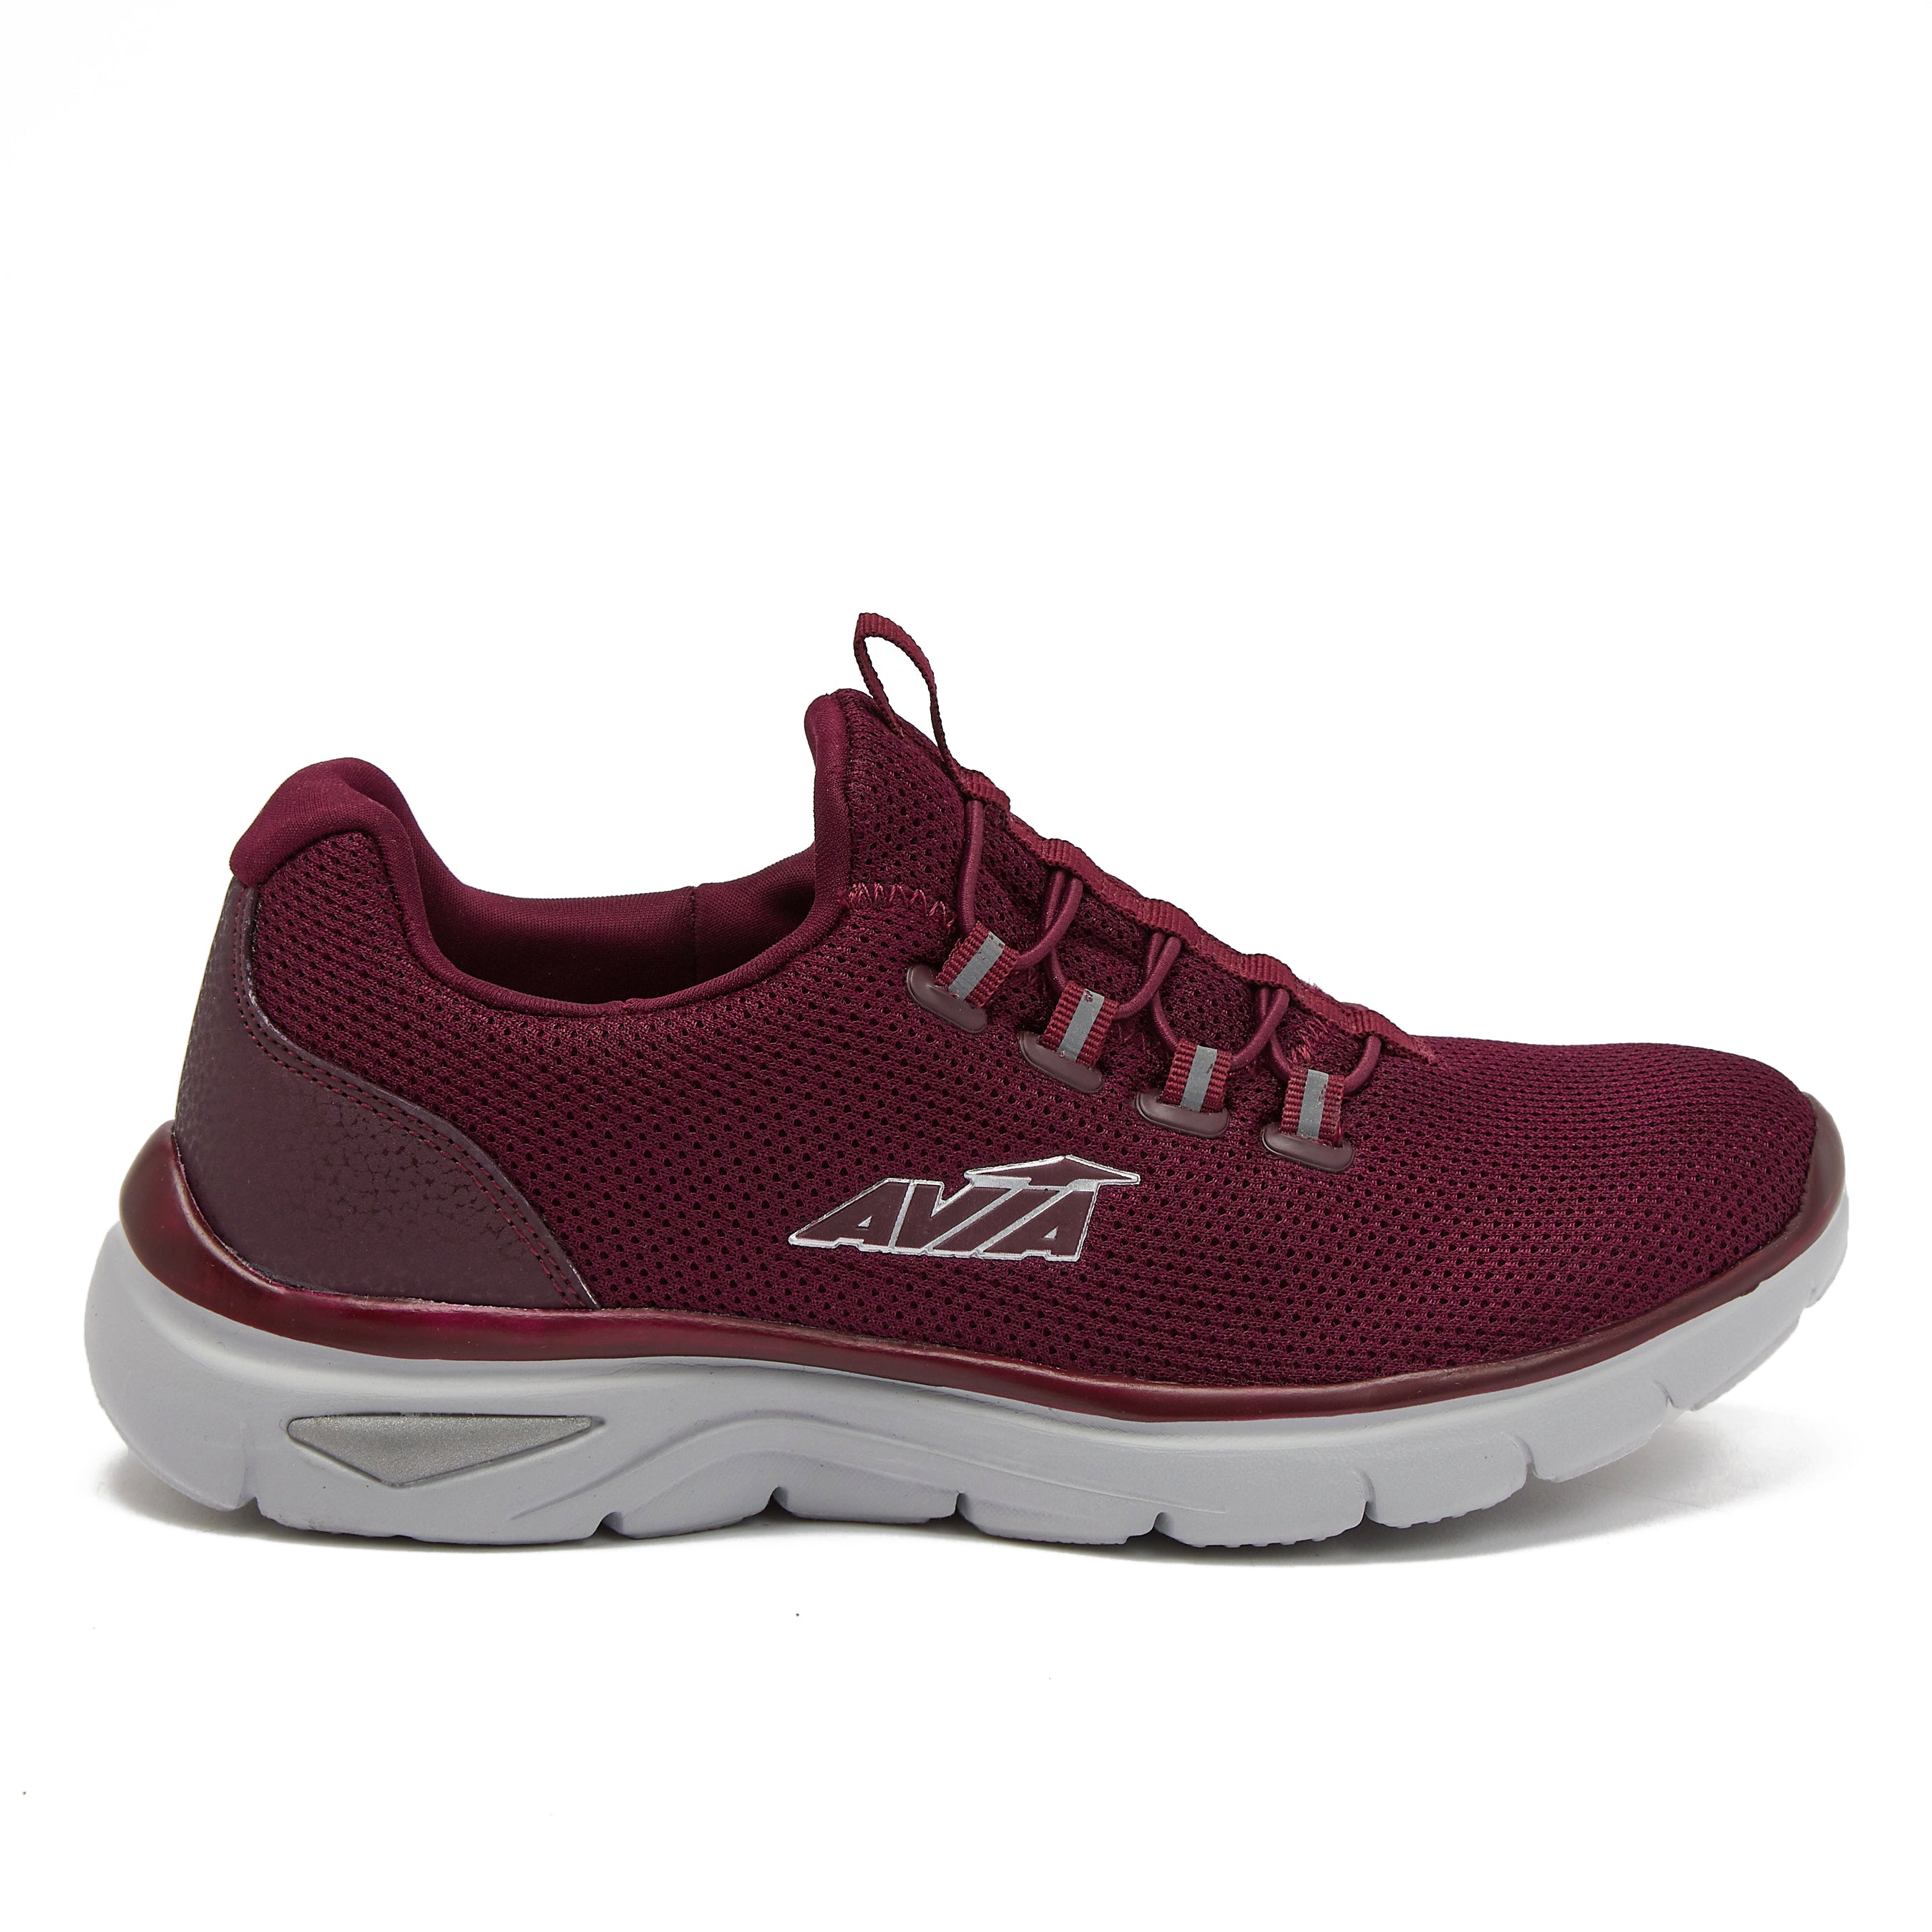 AVIA Sport Shoes :: Sport Shoes Available, Sport shoes, Official archives  of Merkandi